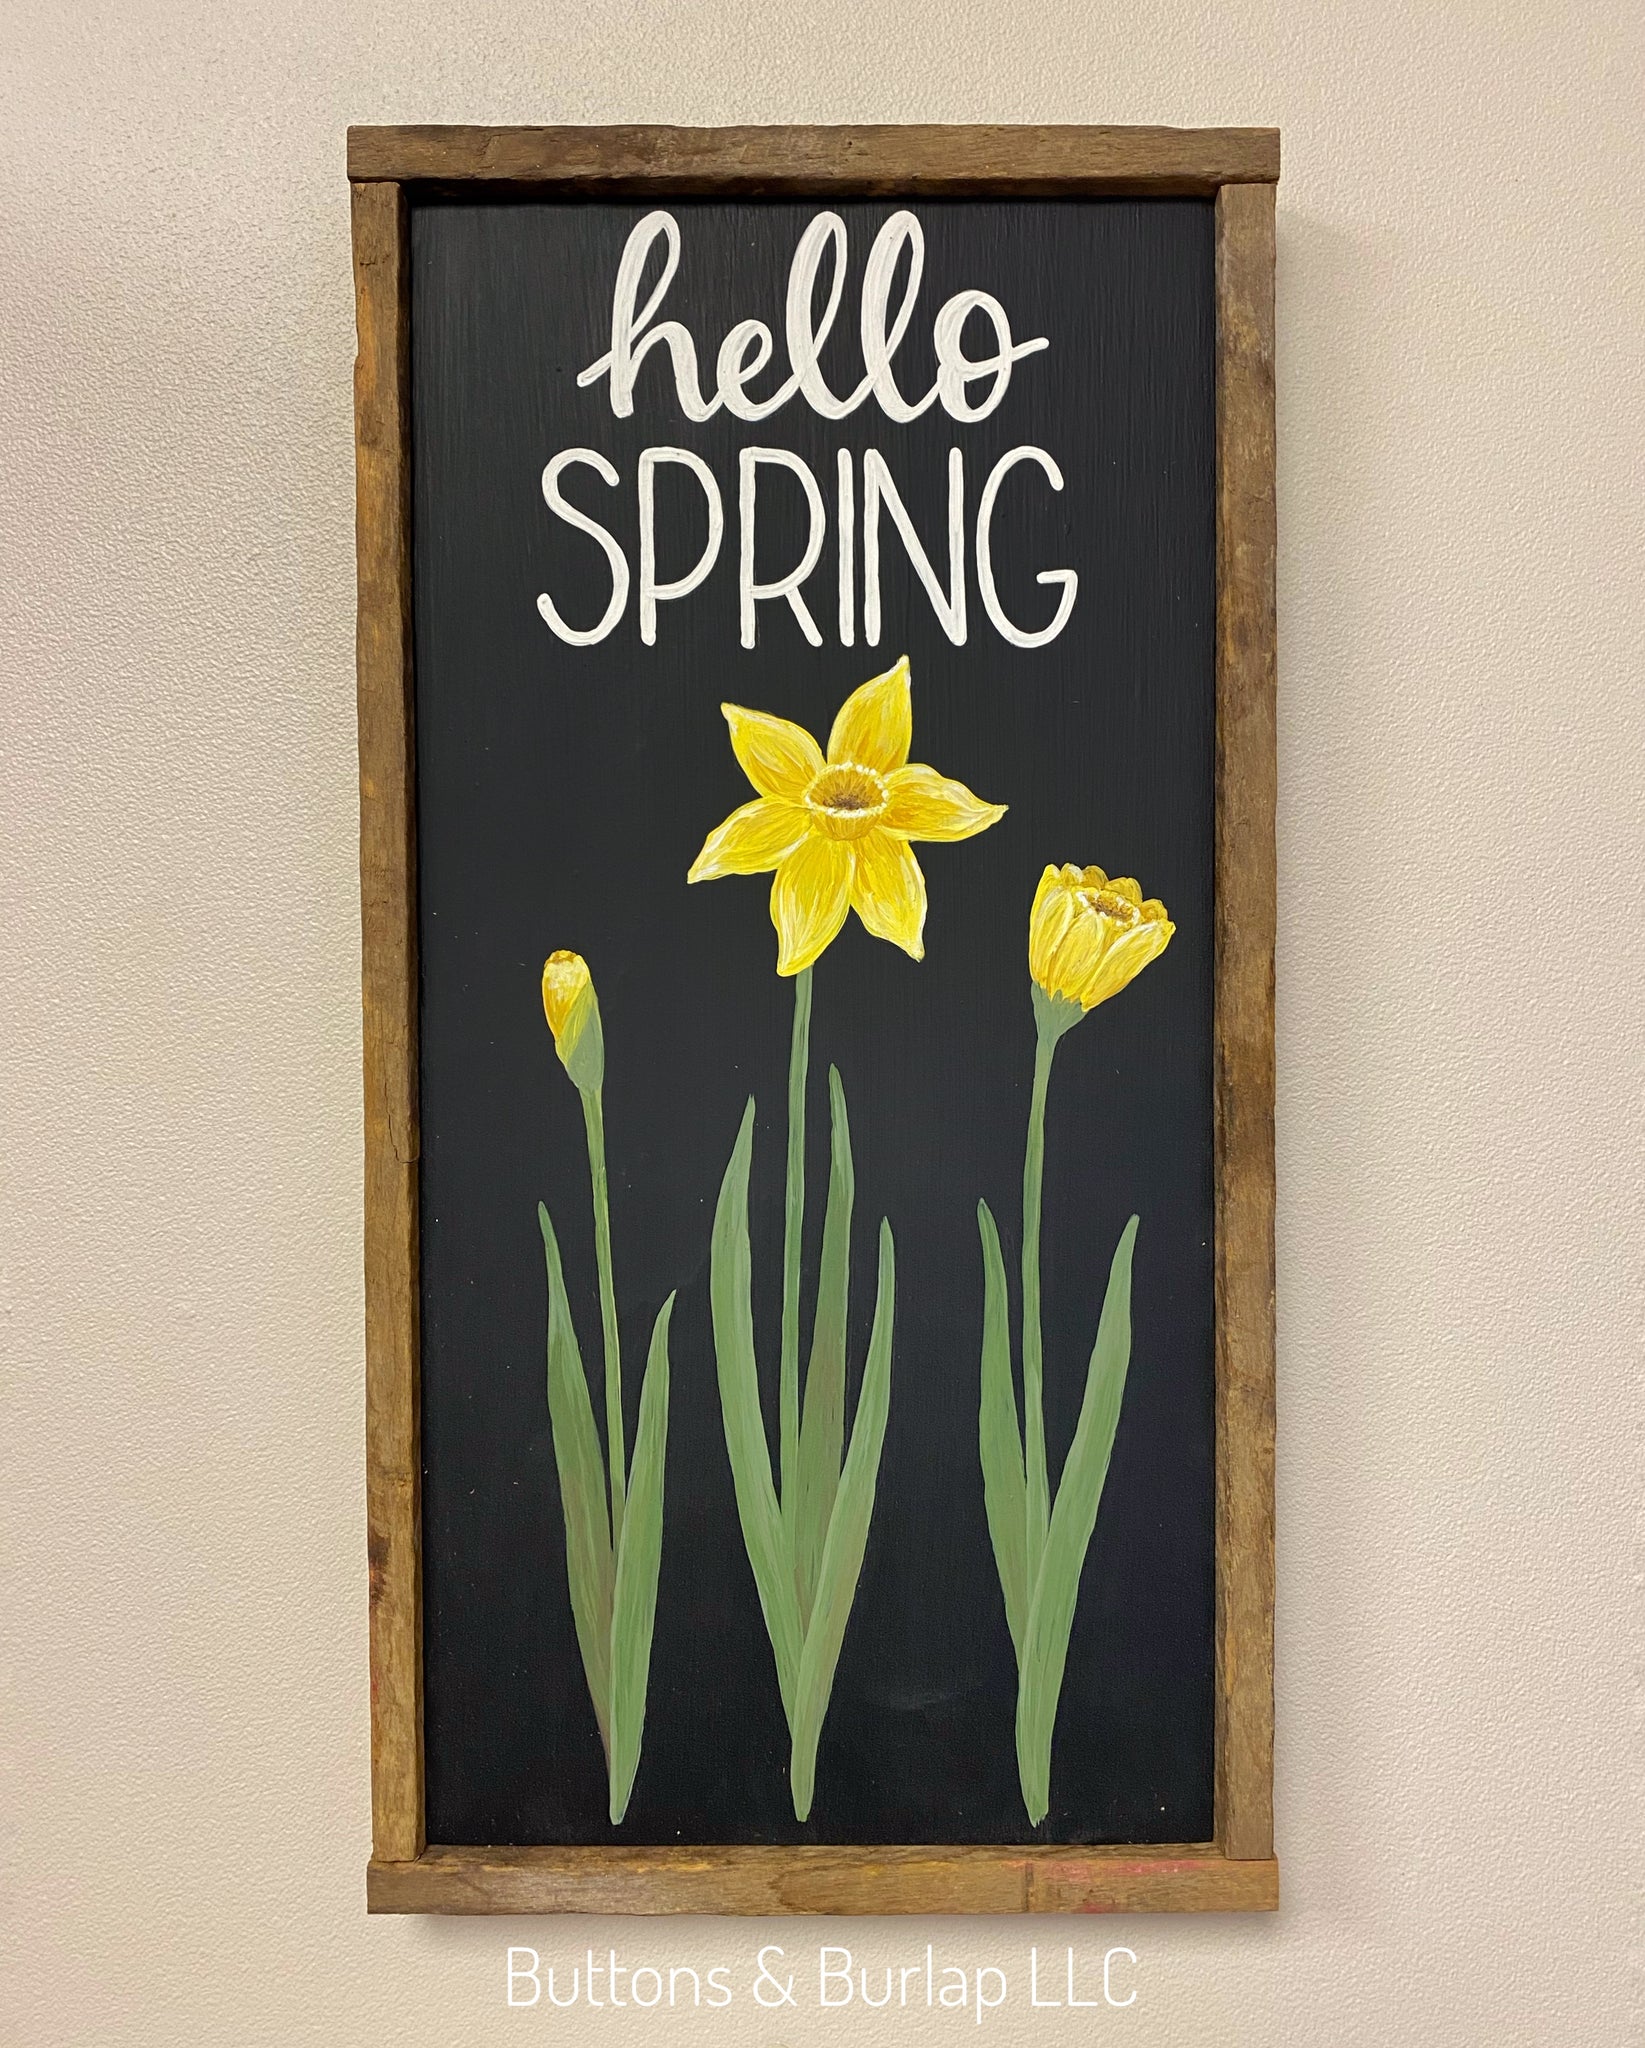 Hello spring, daffodils sign